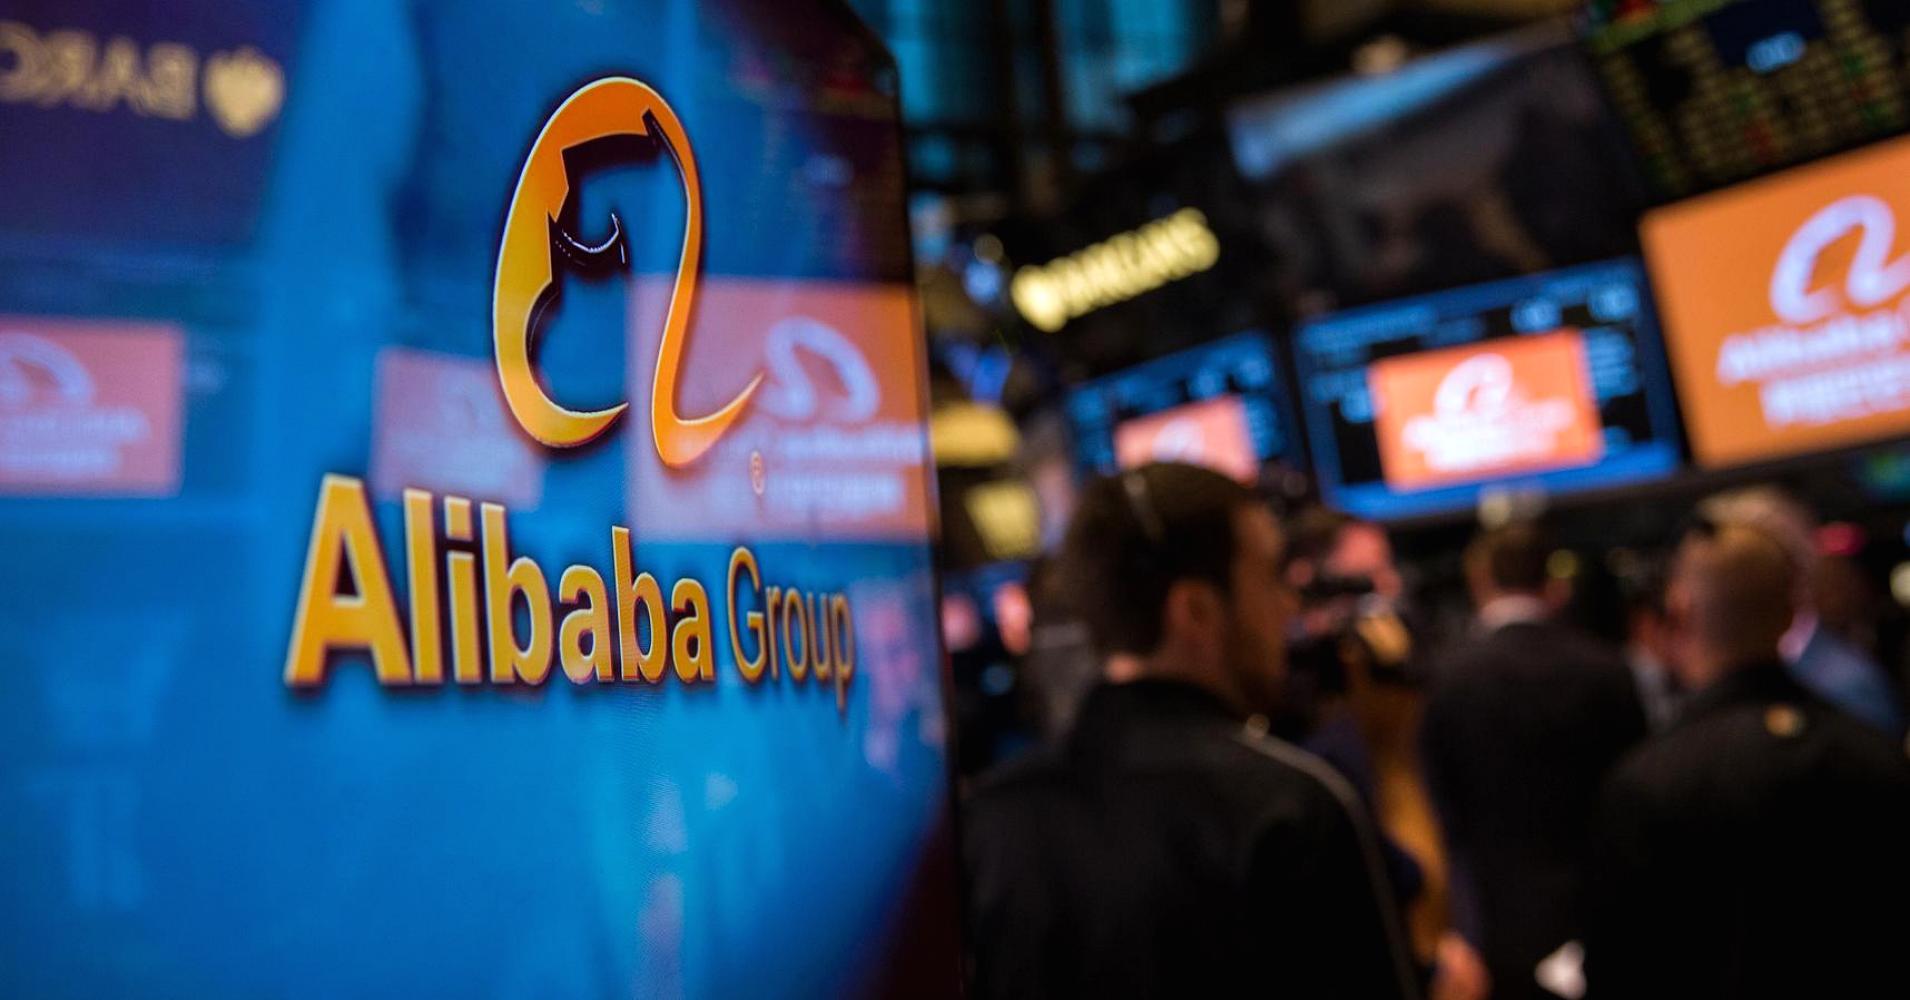 Alibaba wants to make remote work the new normal: Will it succeed?